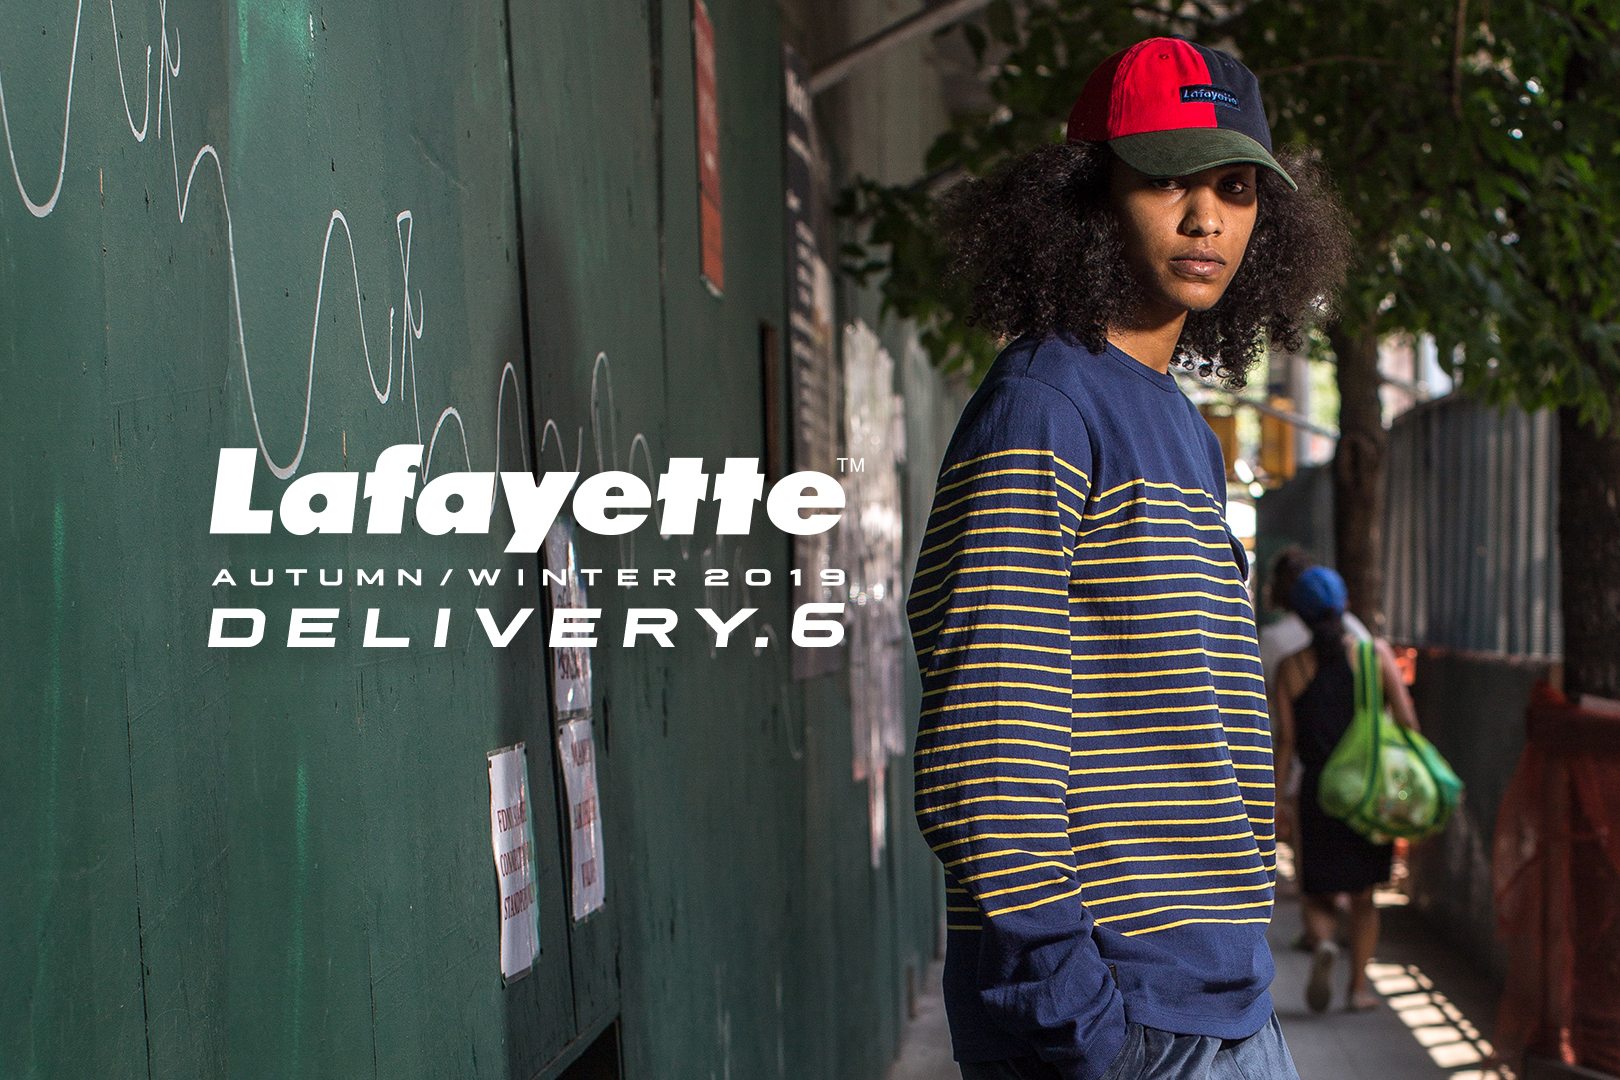 Lafayette 2019 Autumn/Winter Collection Delivery.6